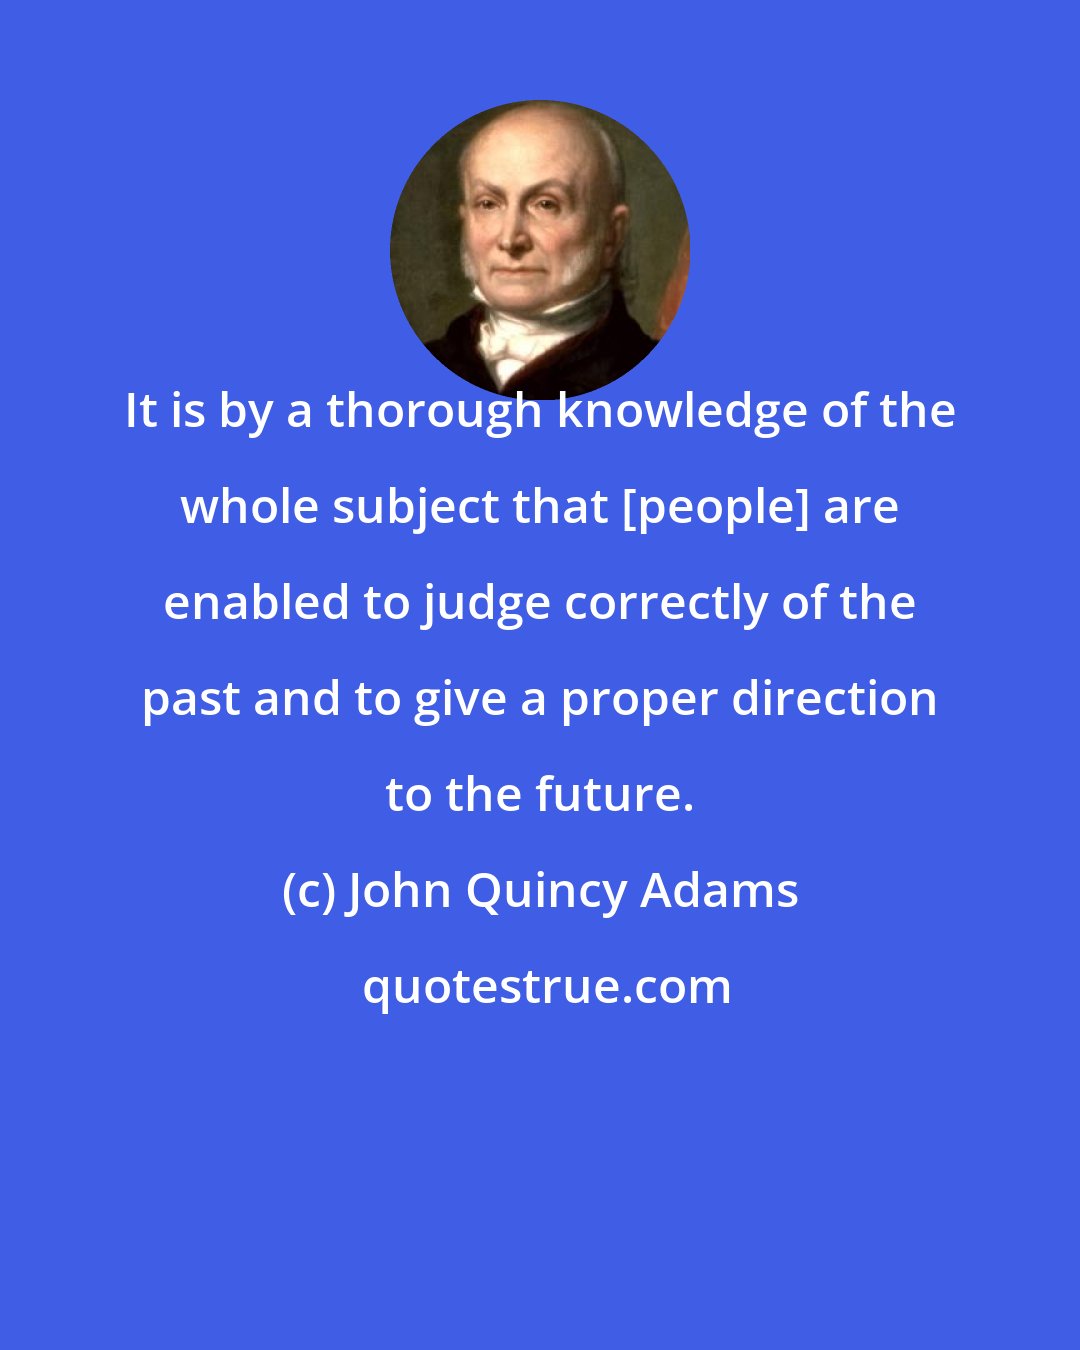 John Quincy Adams: It is by a thorough knowledge of the whole subject that [people] are enabled to judge correctly of the past and to give a proper direction to the future.